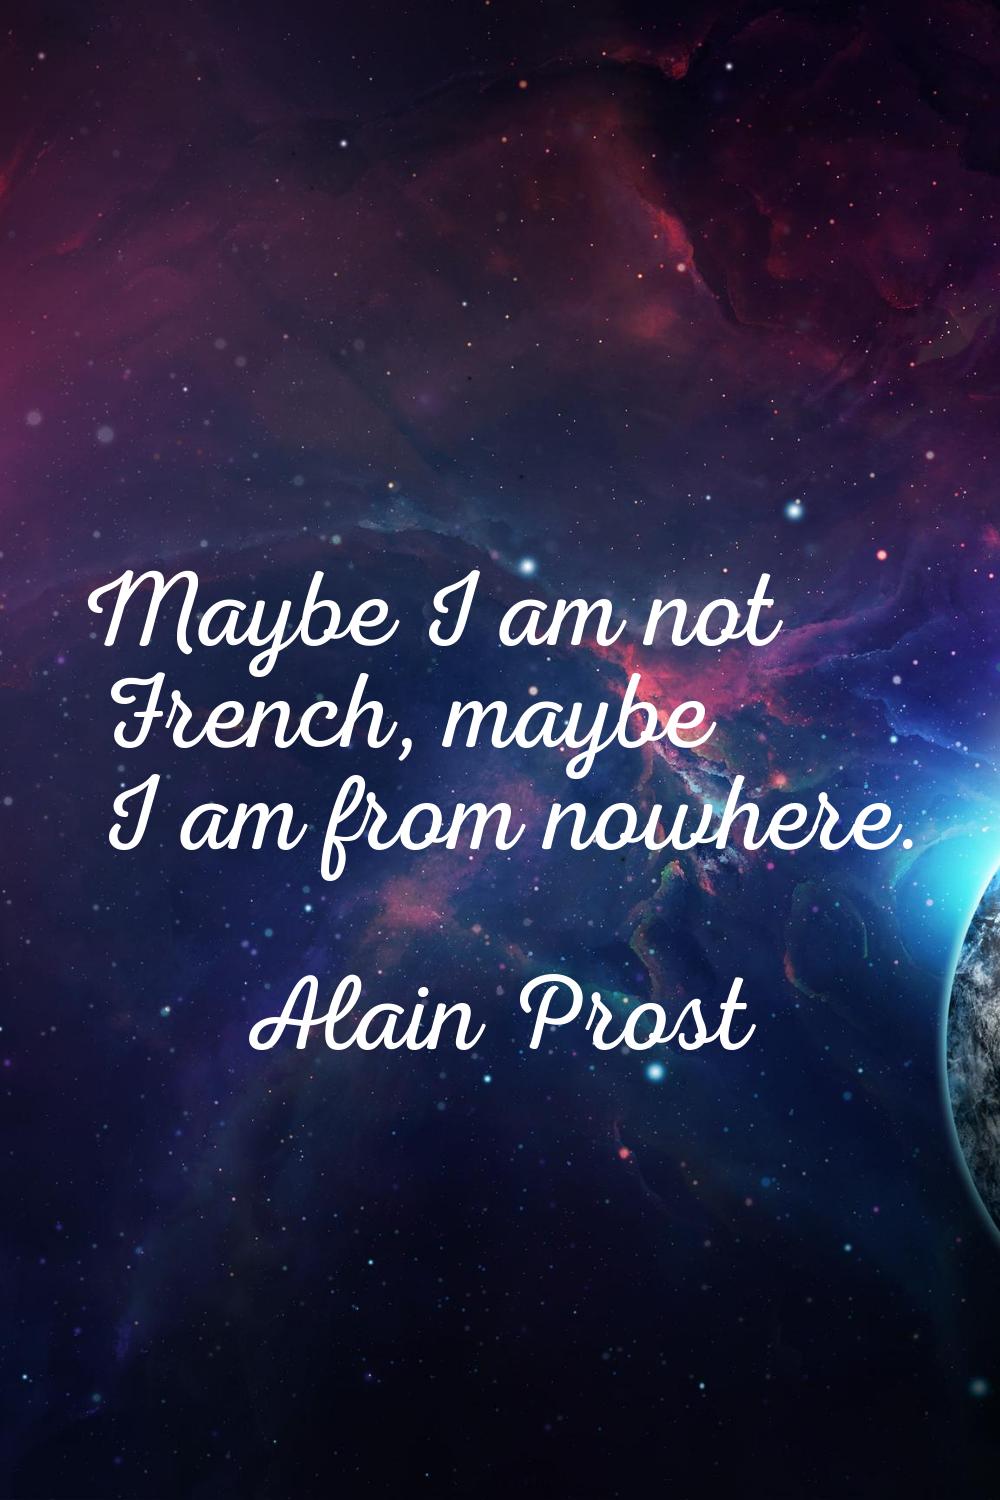 Maybe I am not French, maybe I am from nowhere.